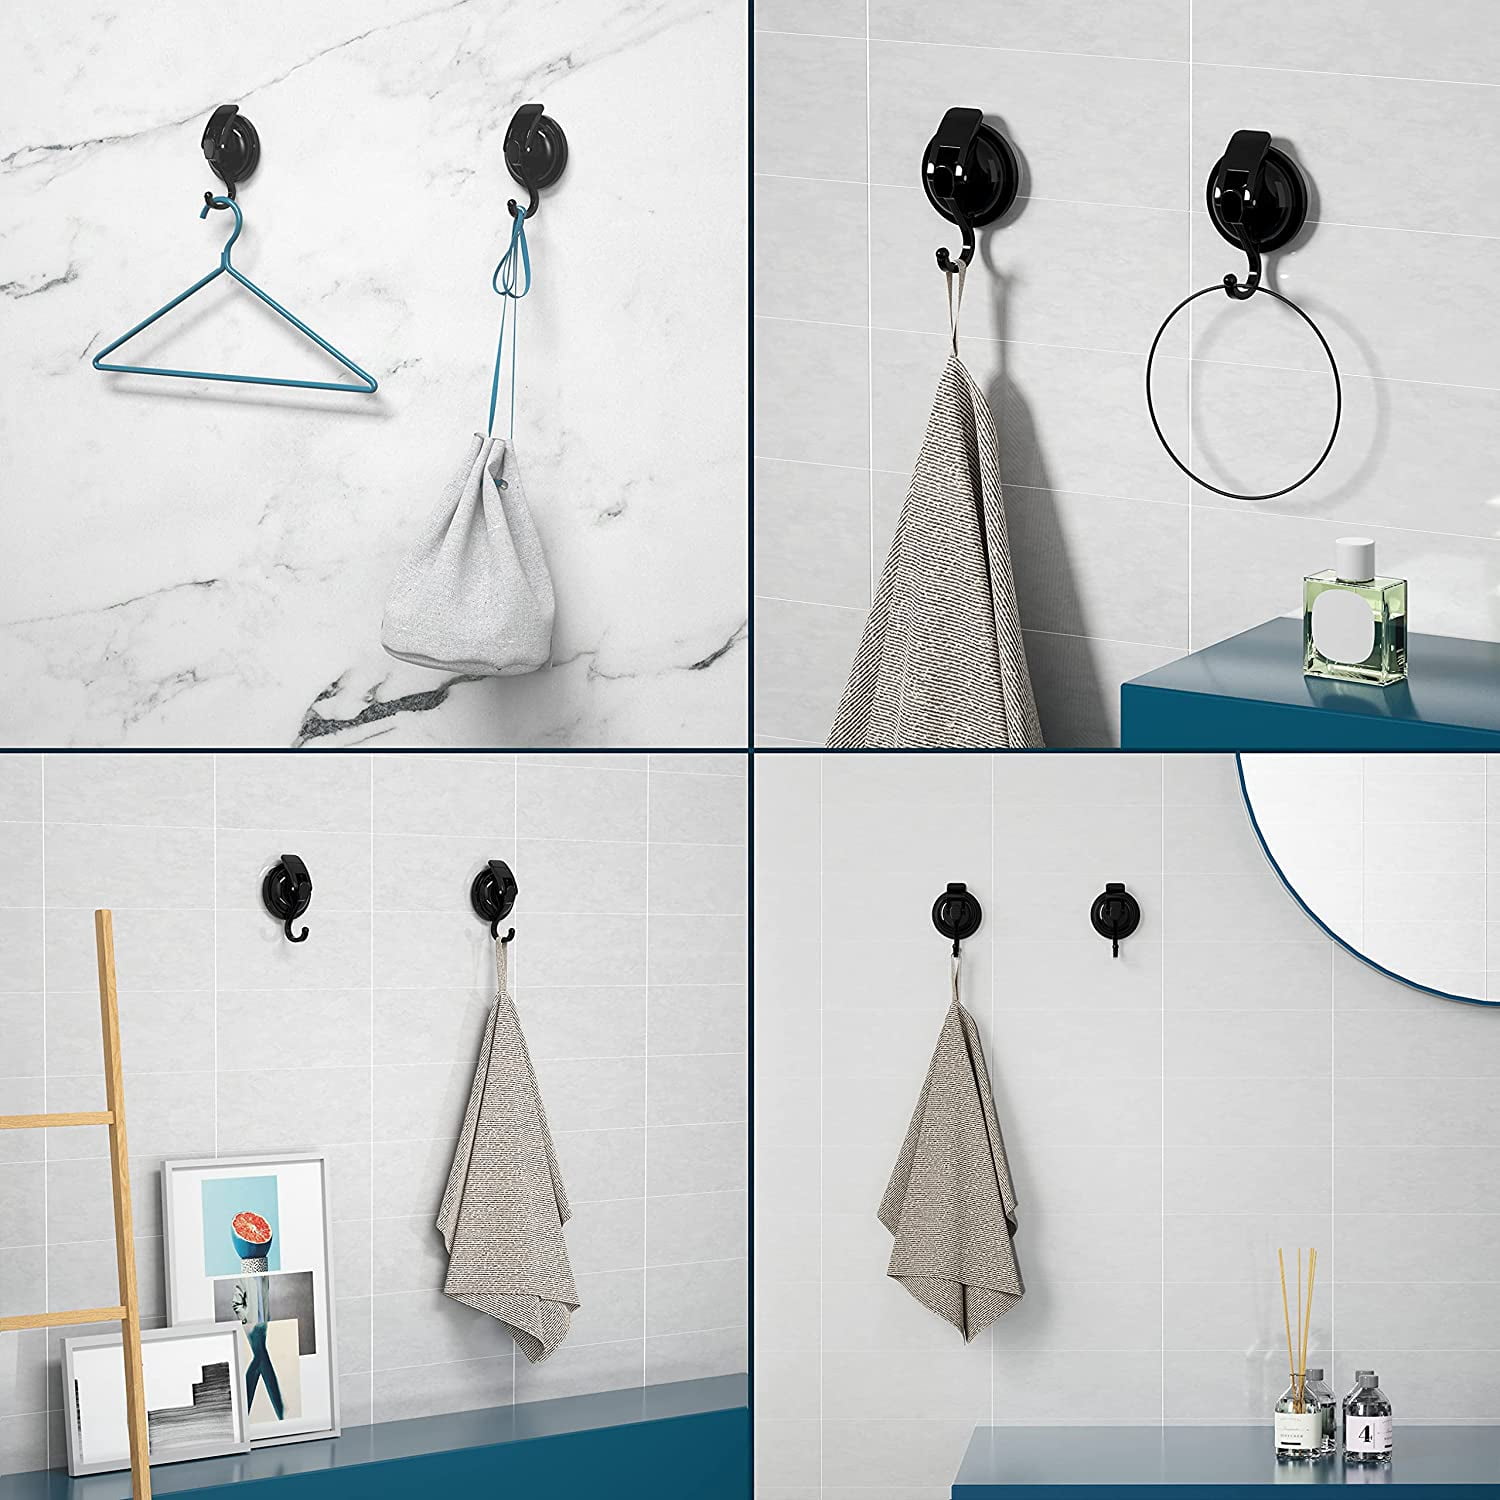 SOCONT Suction Cup Hooks for Shower, SUS 304 Stainless Steel Shower Hook  for Inside Shower, Matte Black Plished Easy to Install Super Suction for